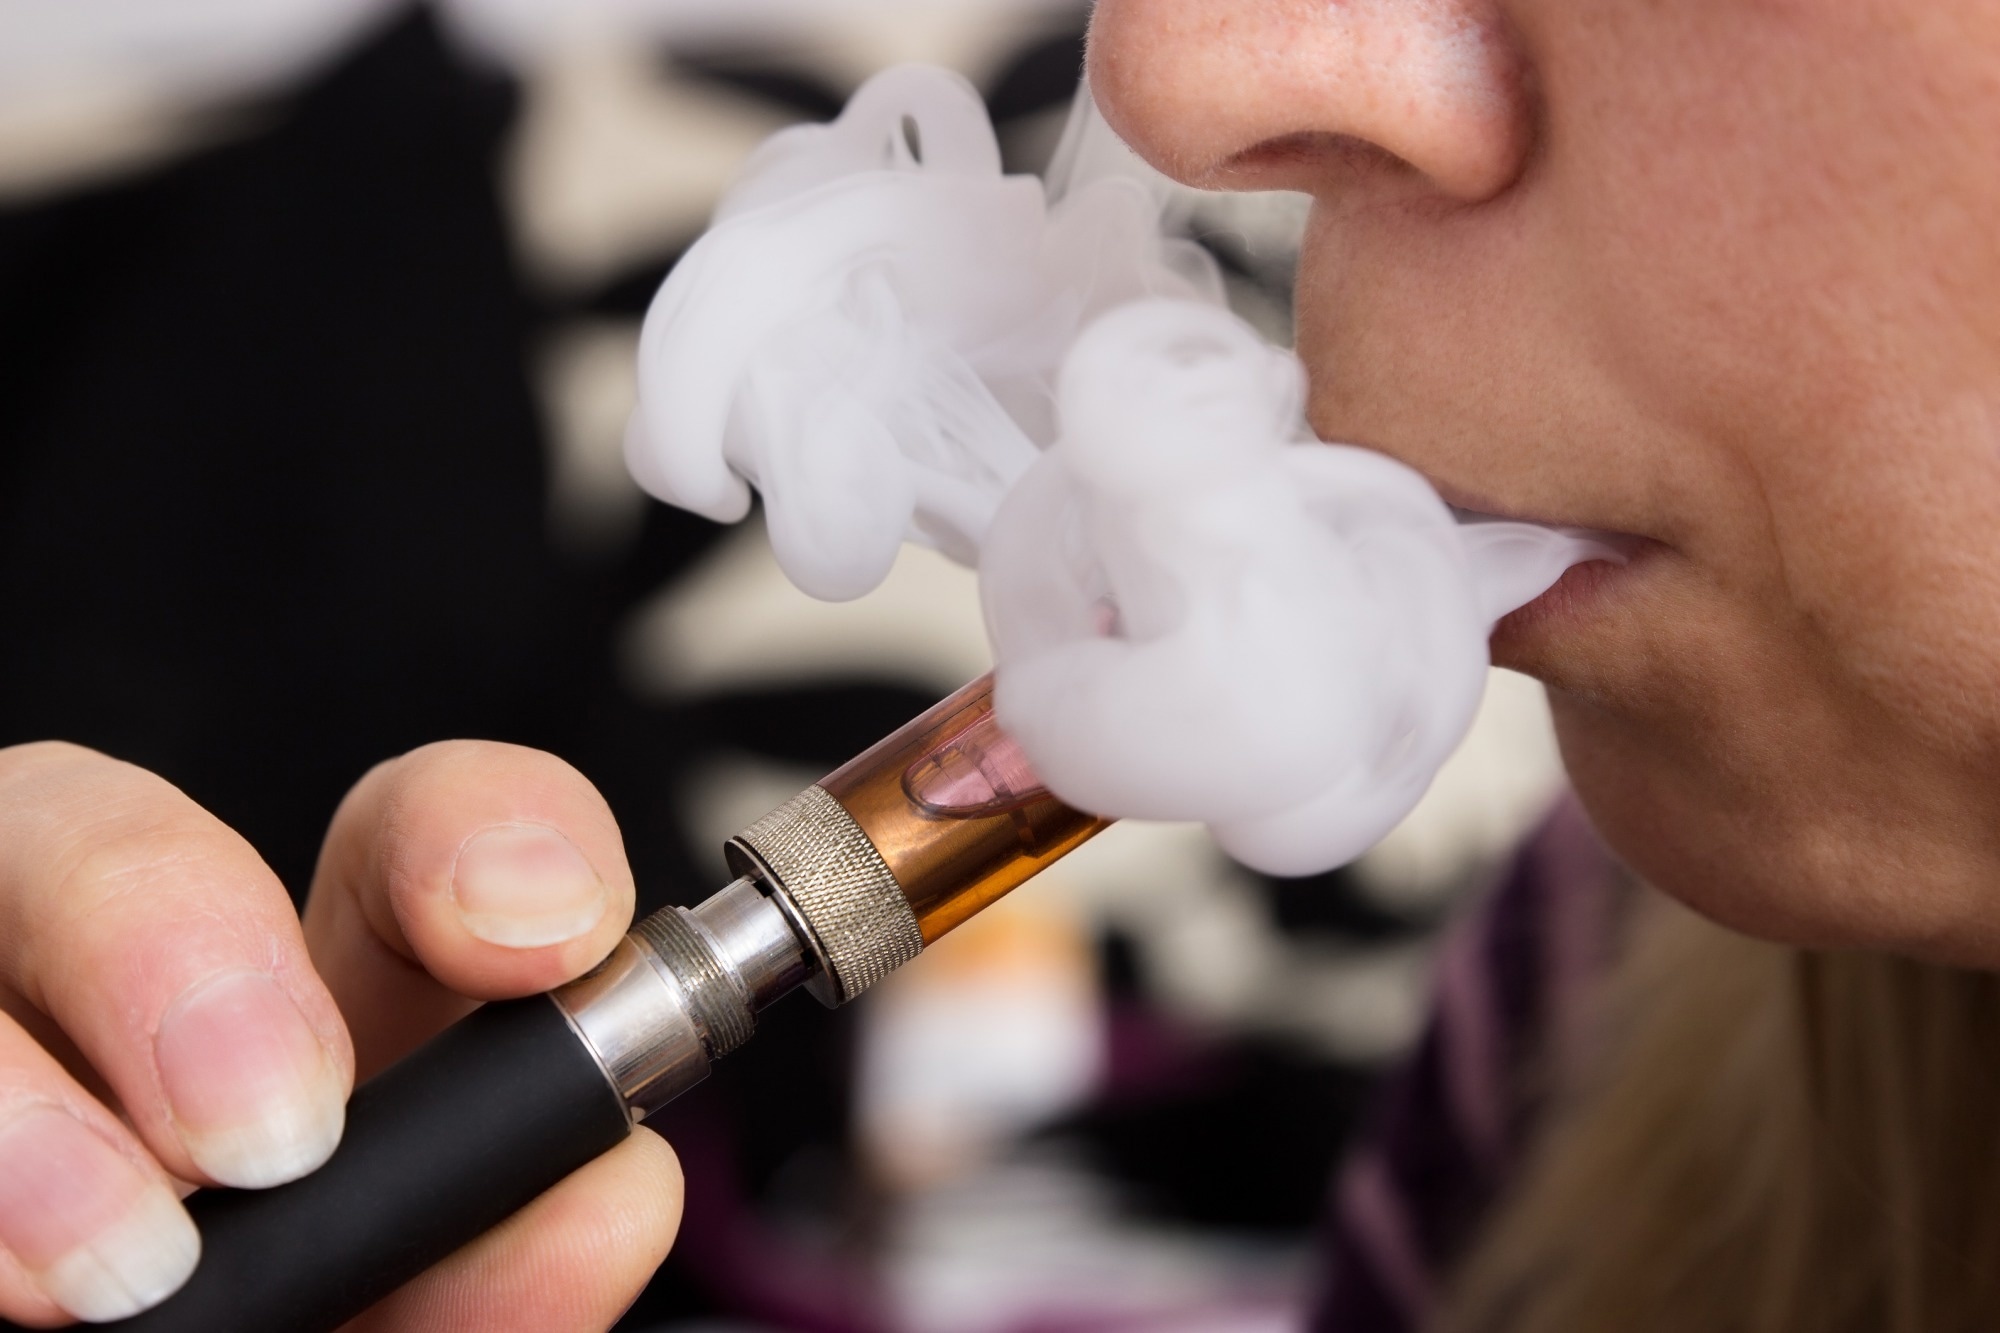 Study: E-Cigarette Quit Attempts and Experiences in a Convenience Sample of Adult Users. Image Credit: e-cigarettes / Shutterstock